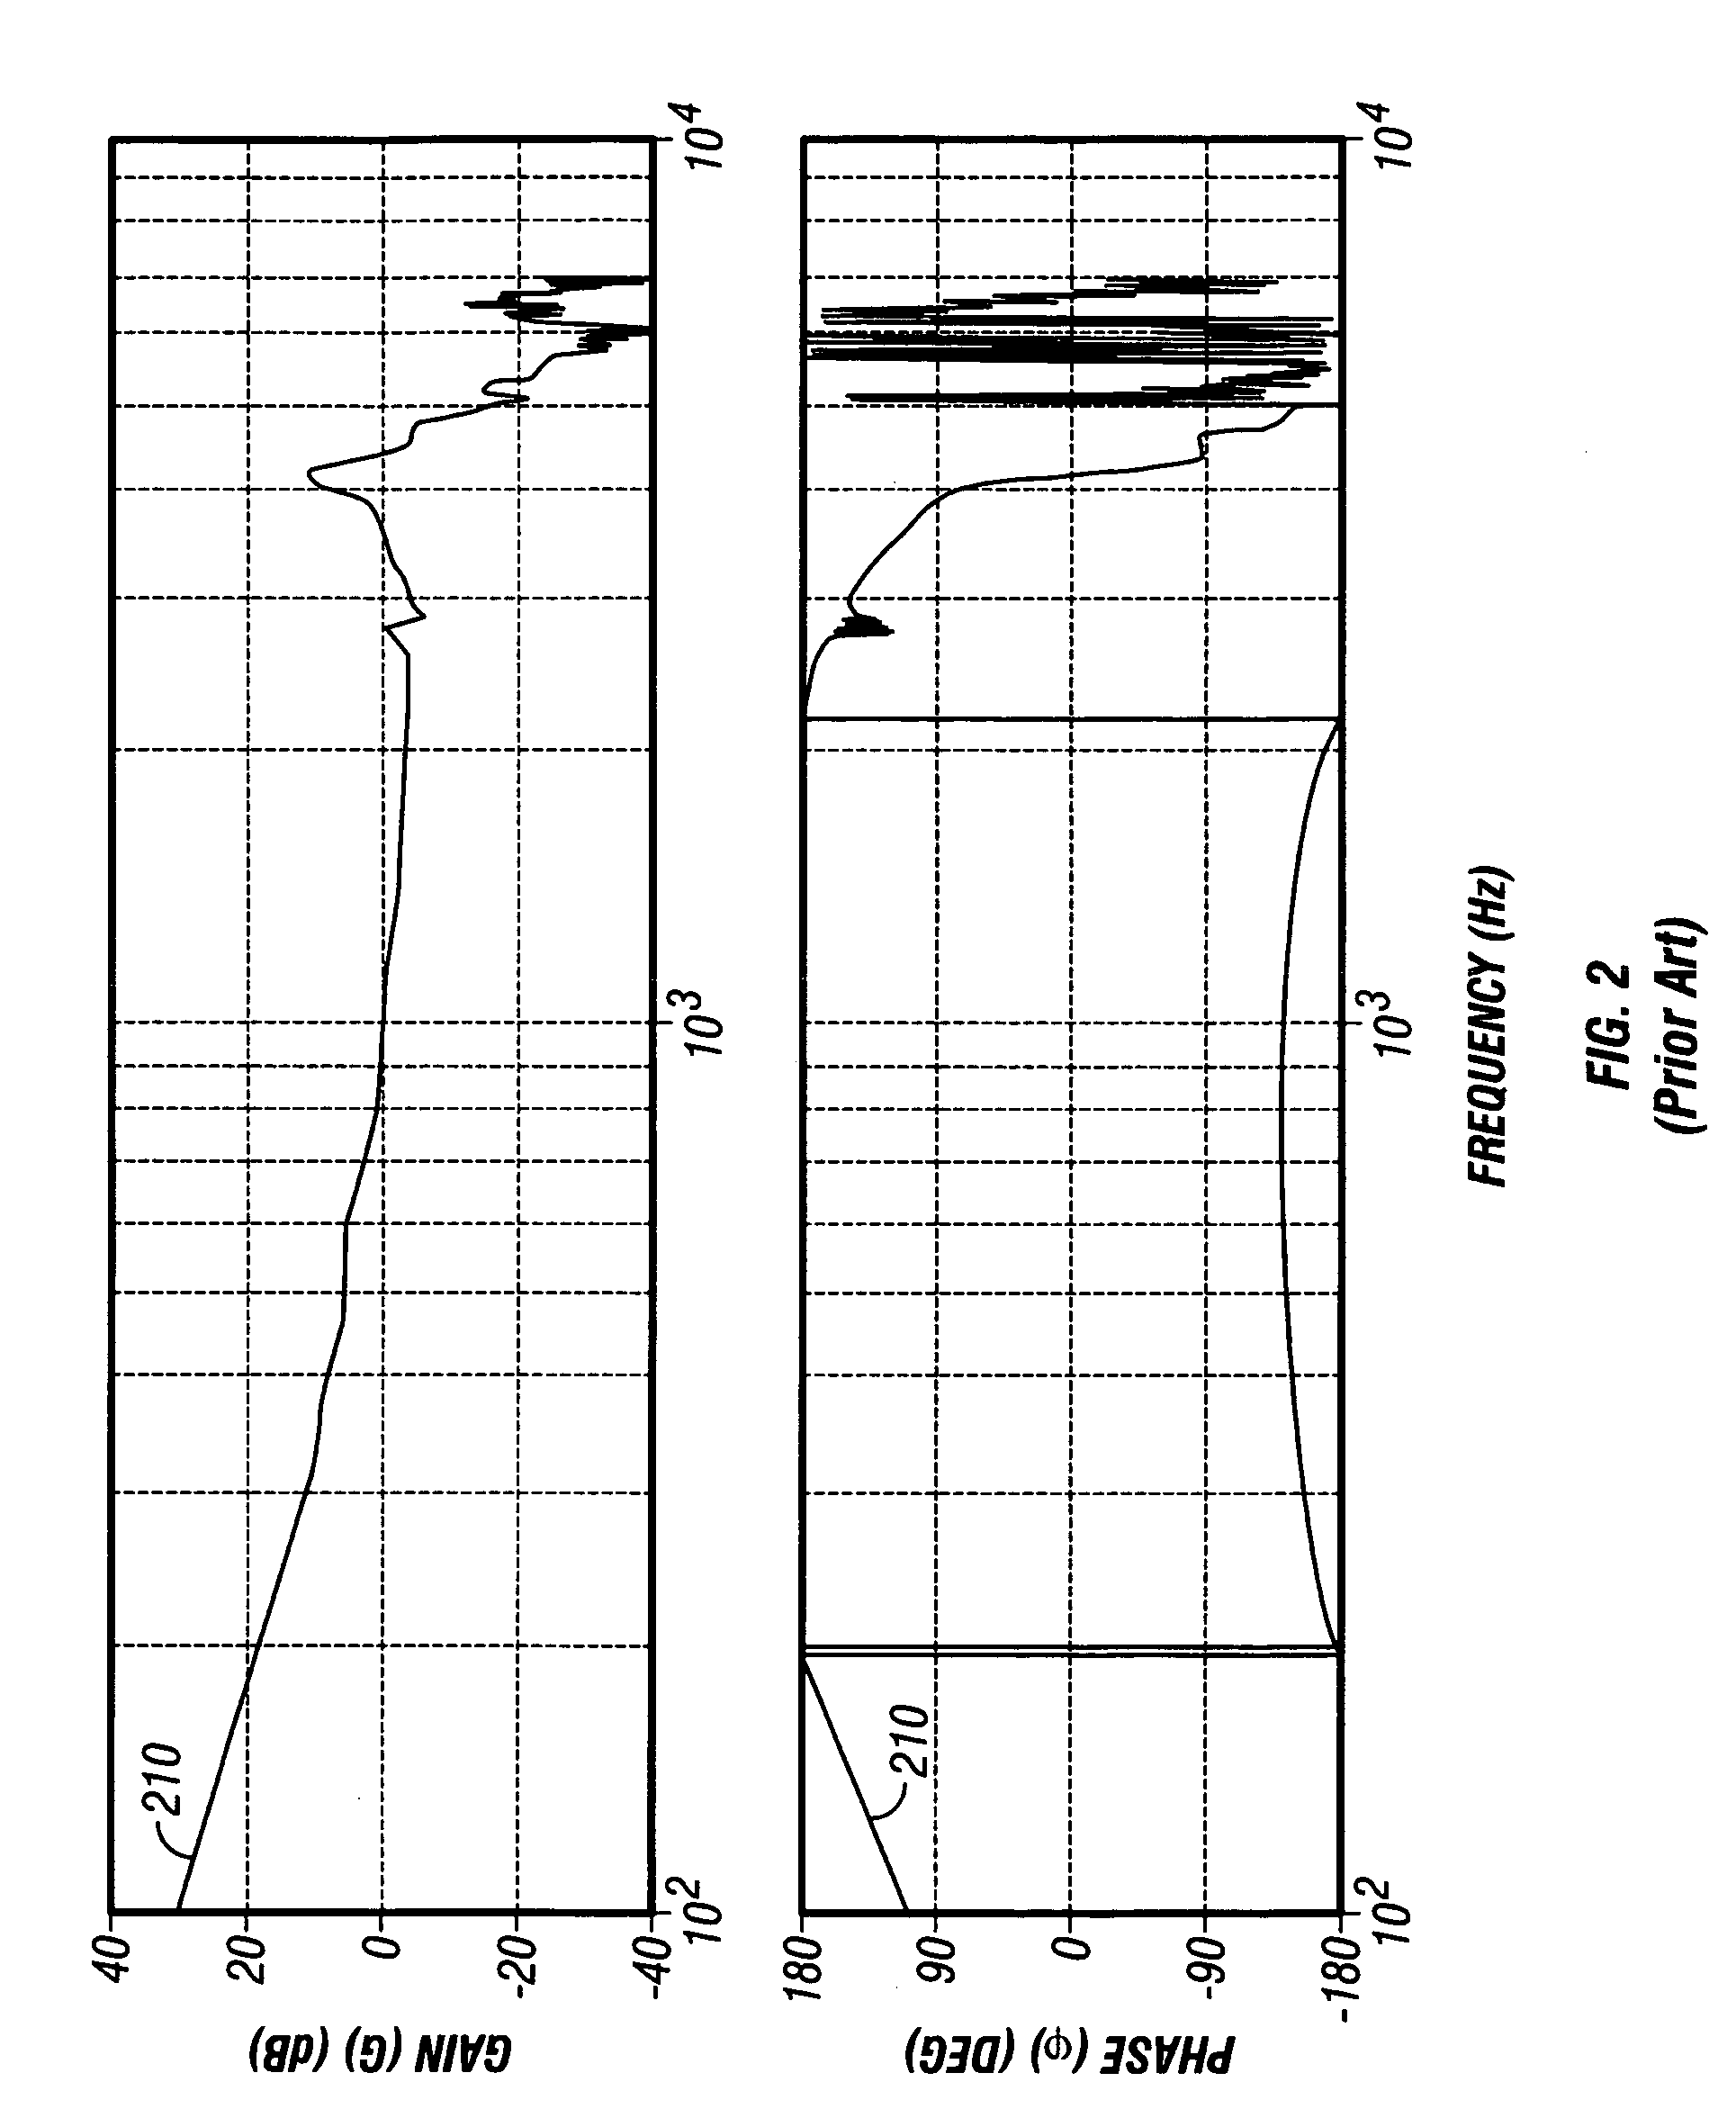 Dual-stage actuator disk drive with method for secondary-actuator failure detection and recovery using a relative-position sensor while track following